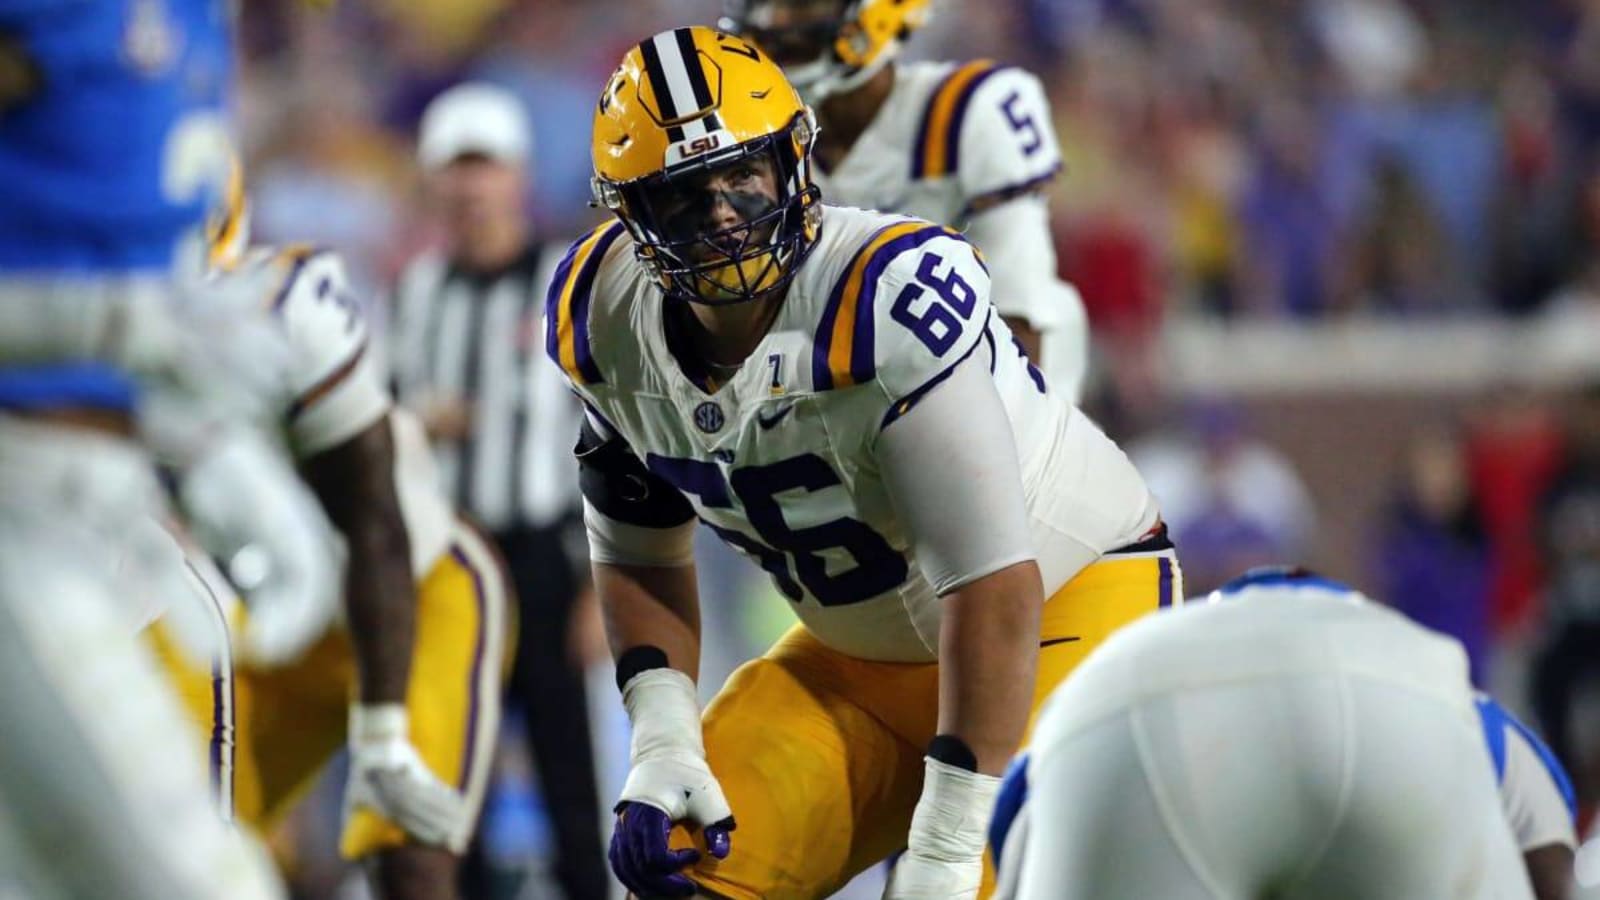 LSU Football: Will Campbell Leading Tigers Offensive Line to New Heights